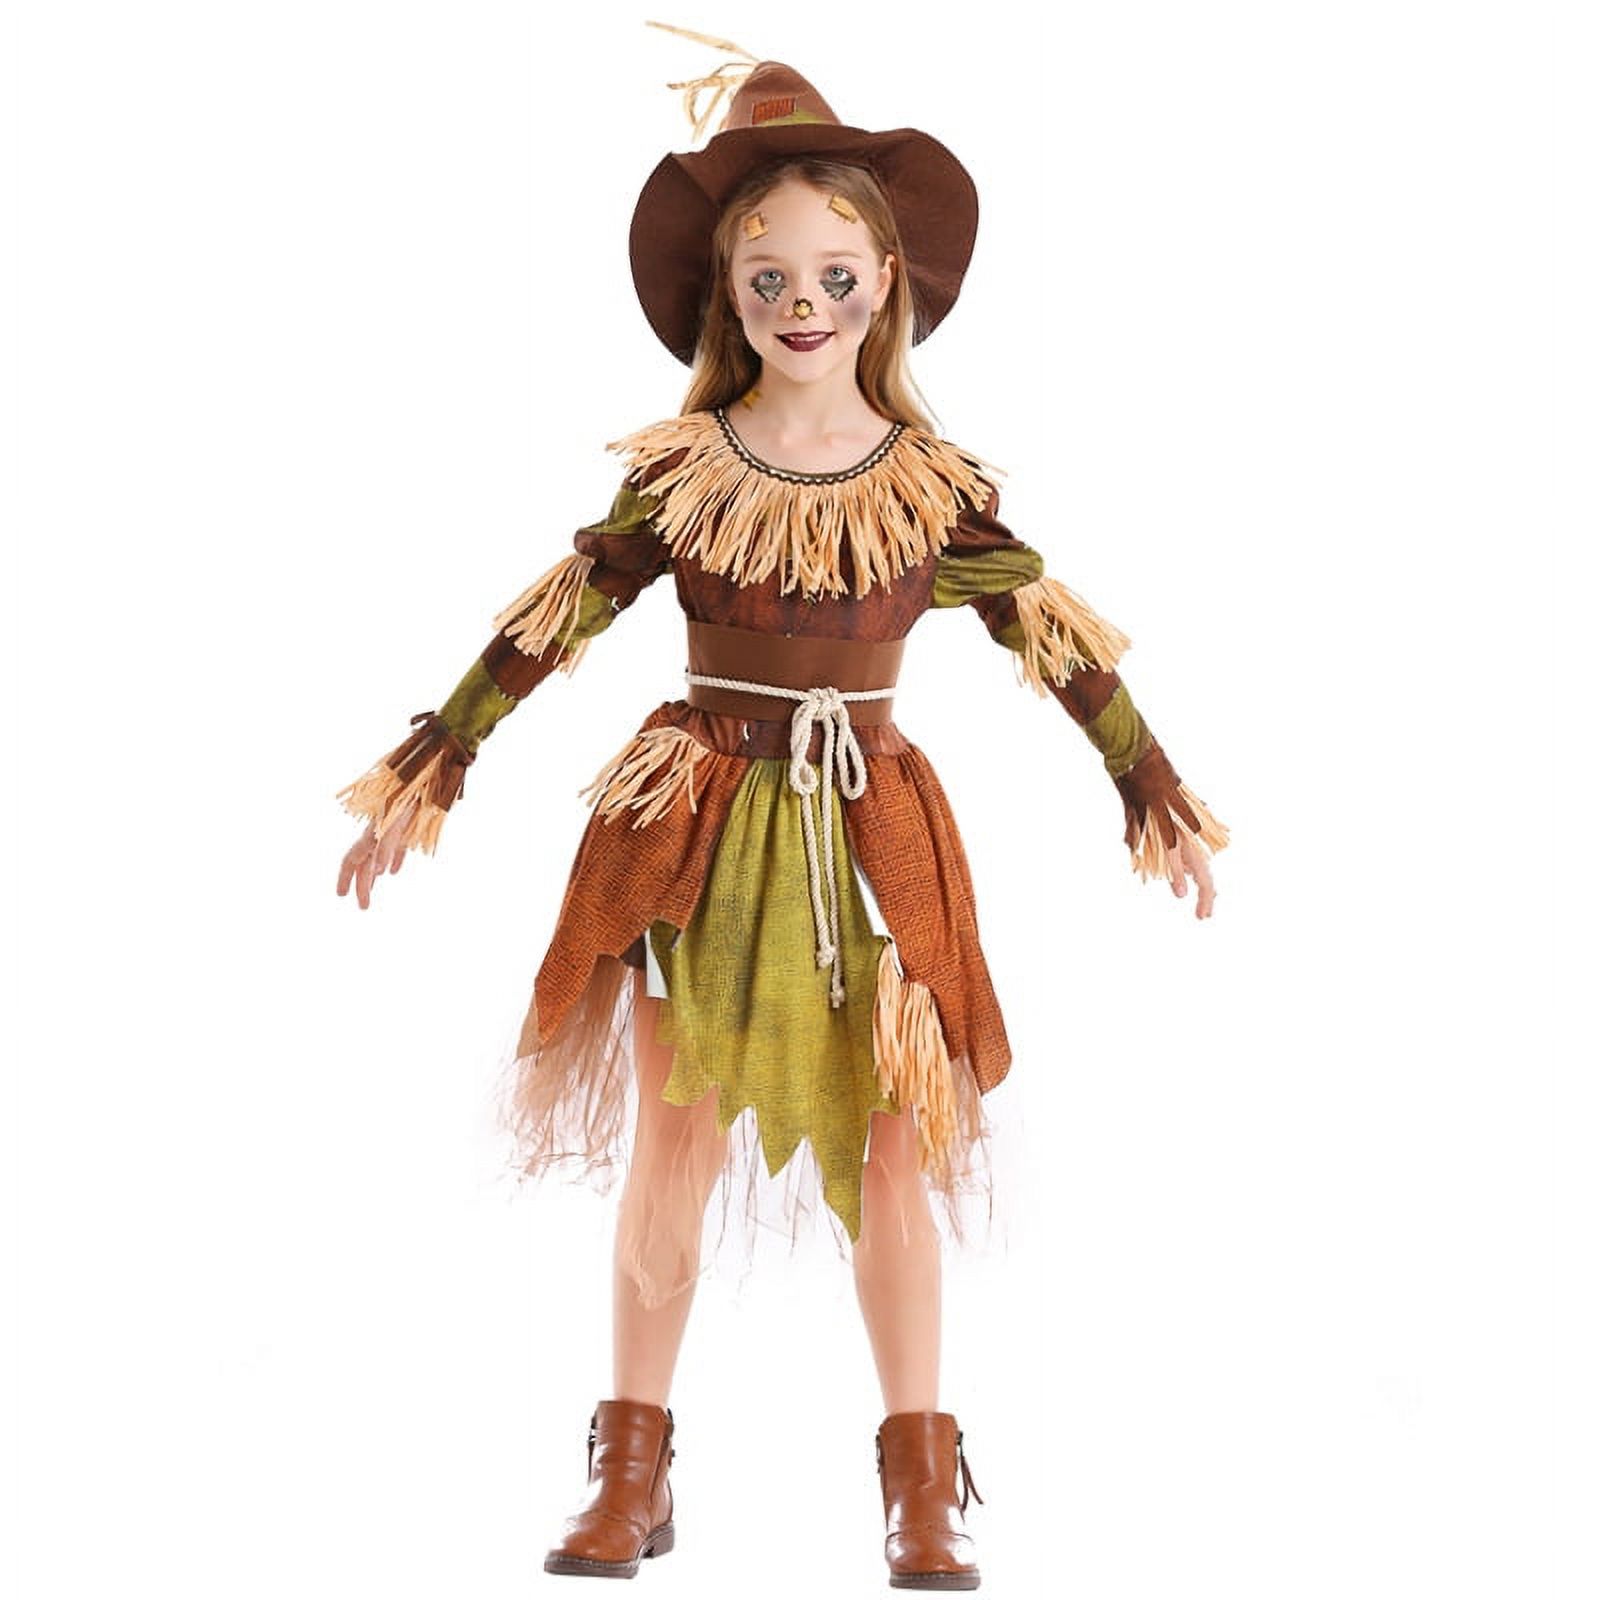 Children Girls Scary Farm Scarecrow Costume Party Dress up, 4-10Y - image 1 of 6